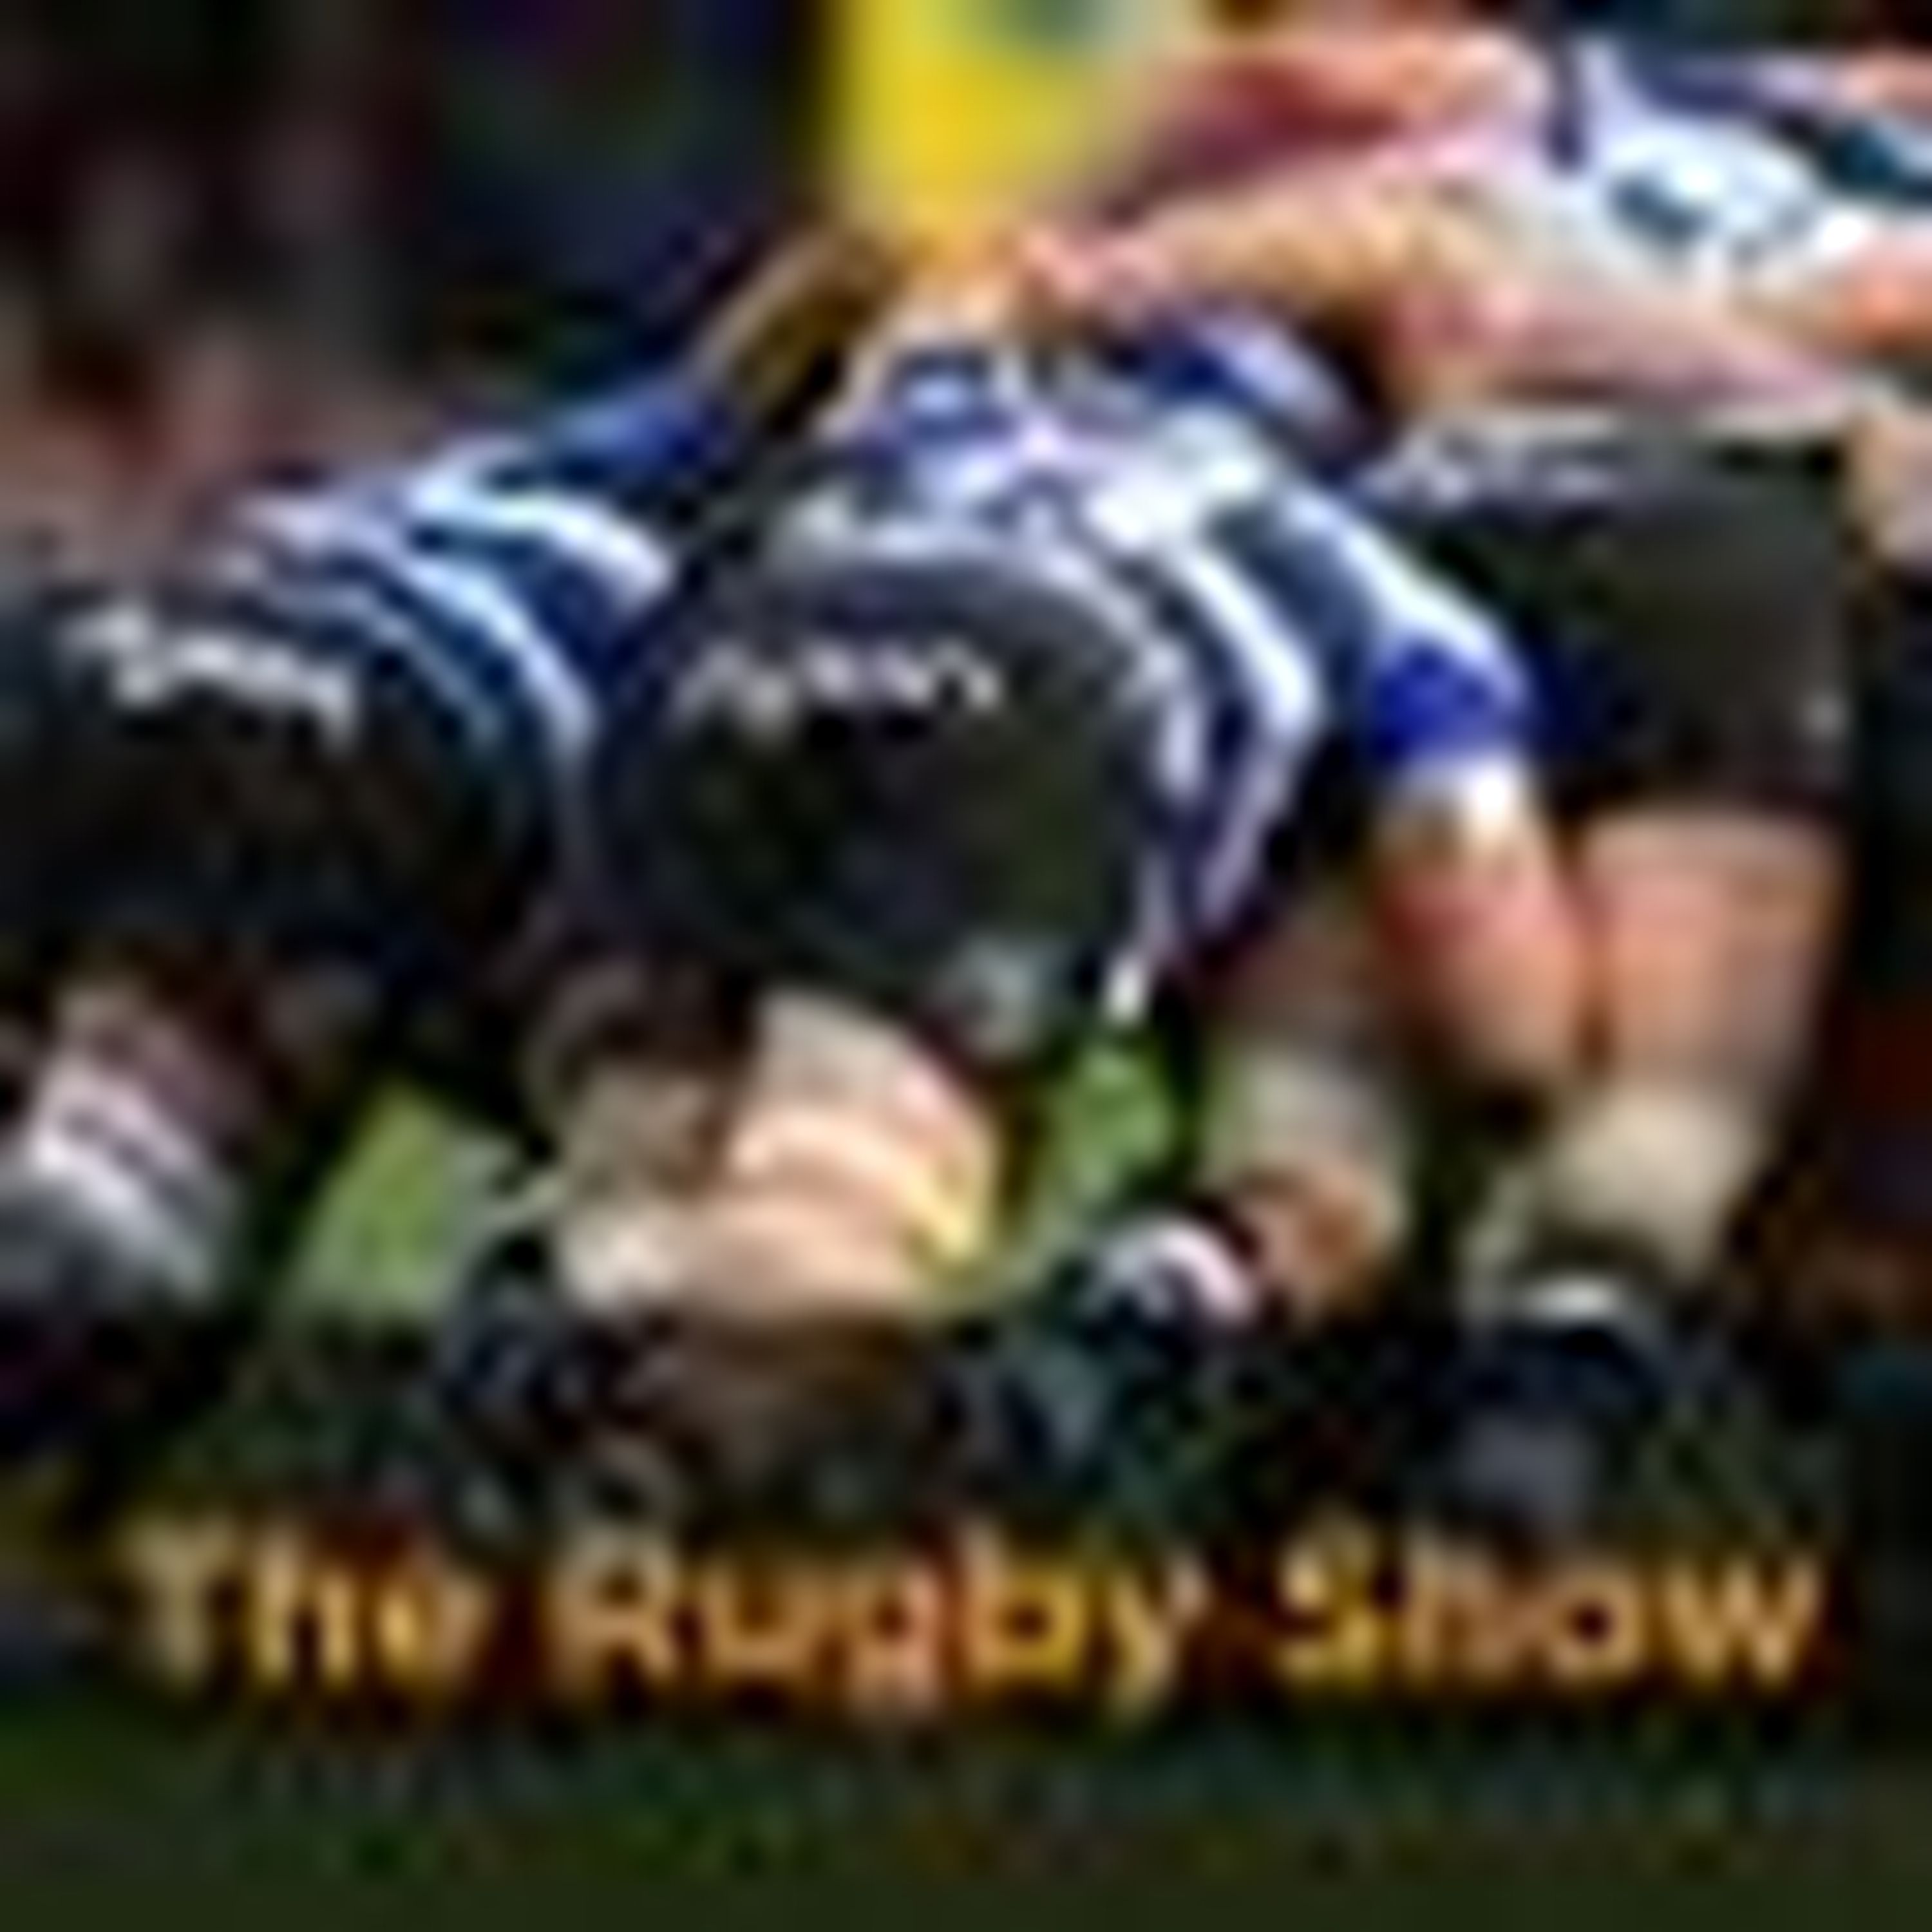 The Rugby Show on talkSPORT 2 podcast - Monday, May 28